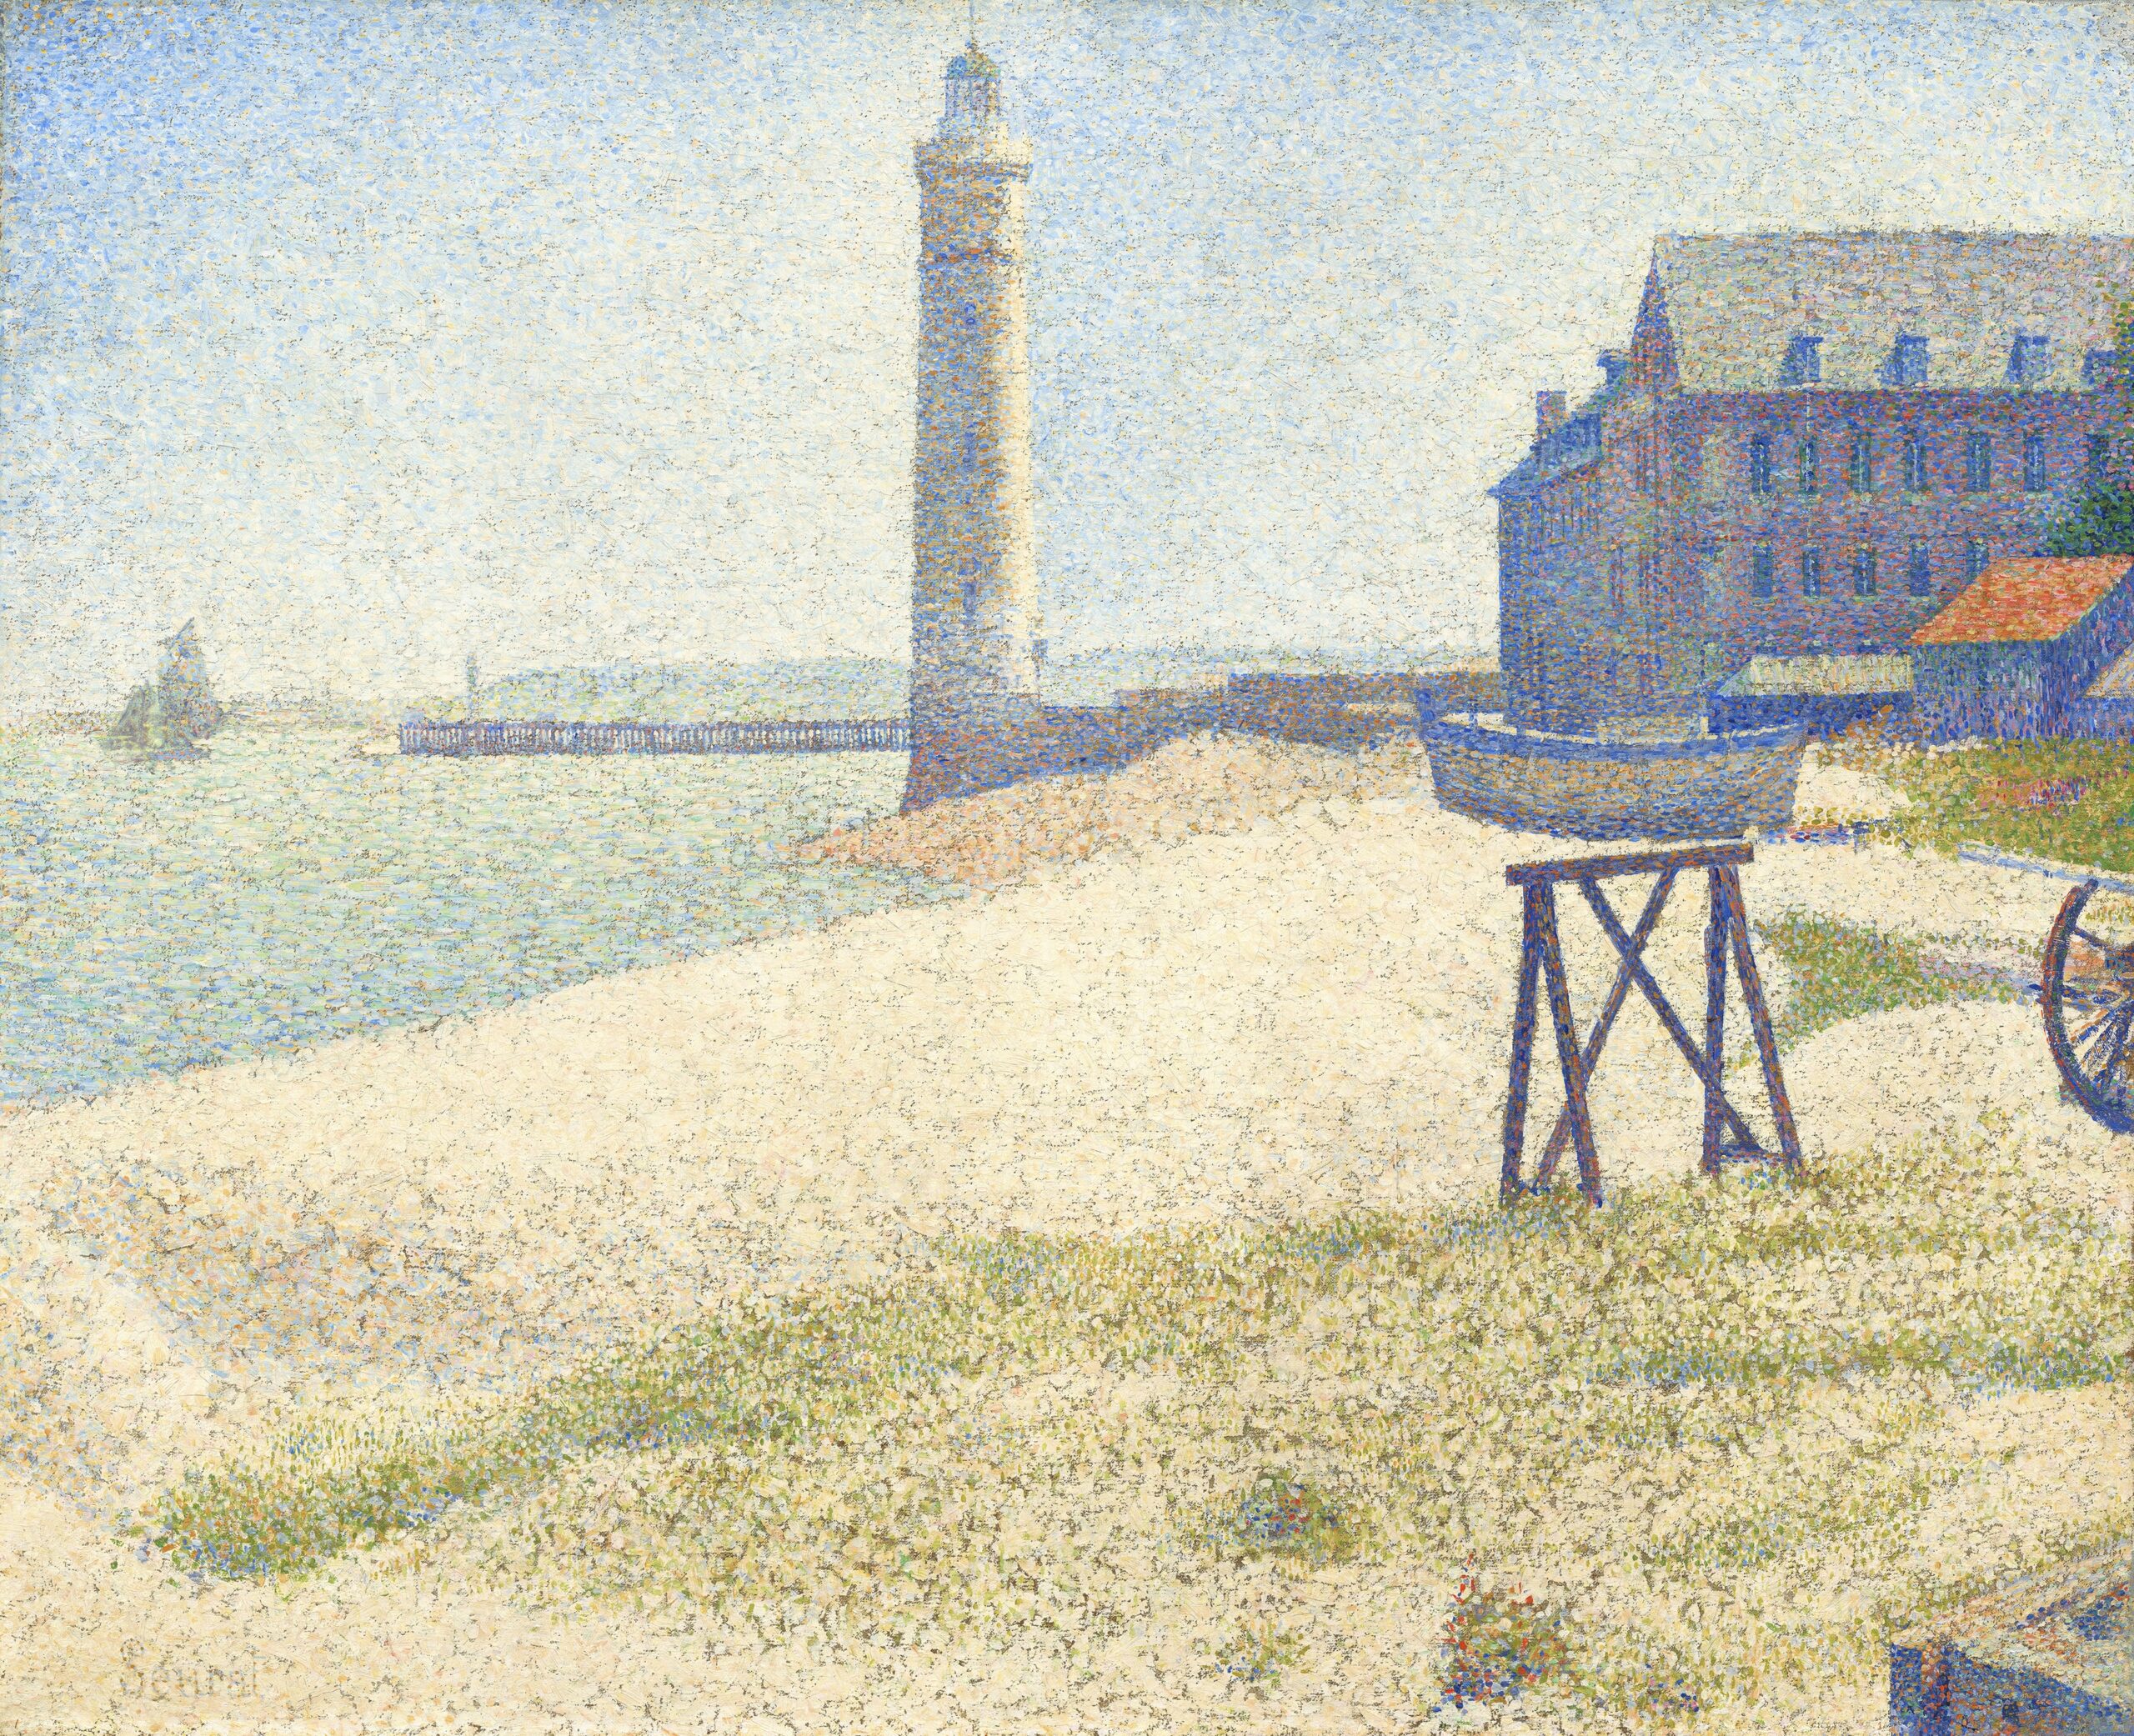 The Lighthouse at Honfleur (1886) by Georges Seurat. Original from The National Gallery of Art. Digitally enhanced by rawpixel.